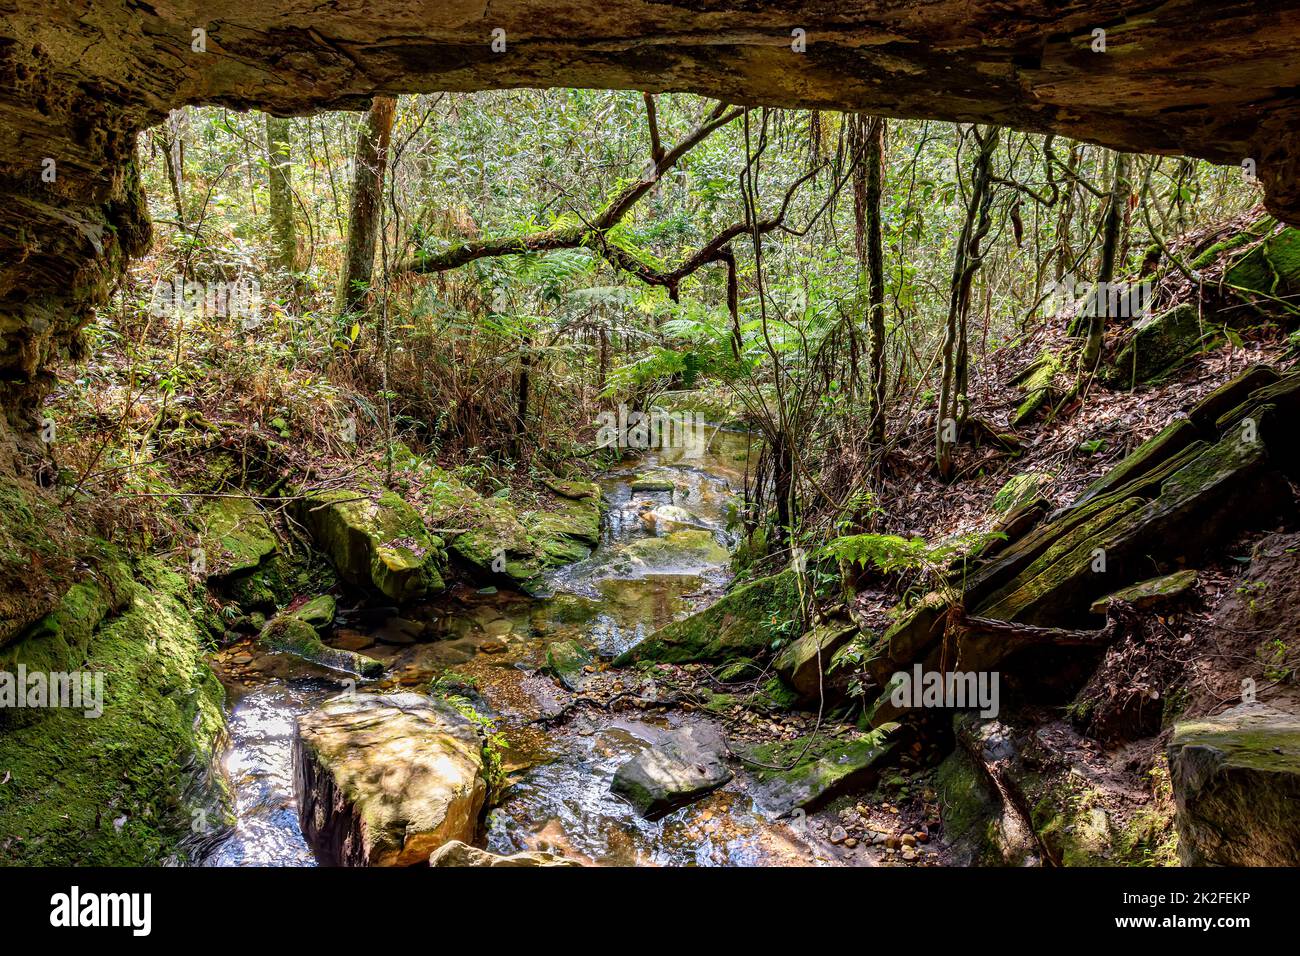 Rainforest cave interior with small river and tropical forest Stock Photo